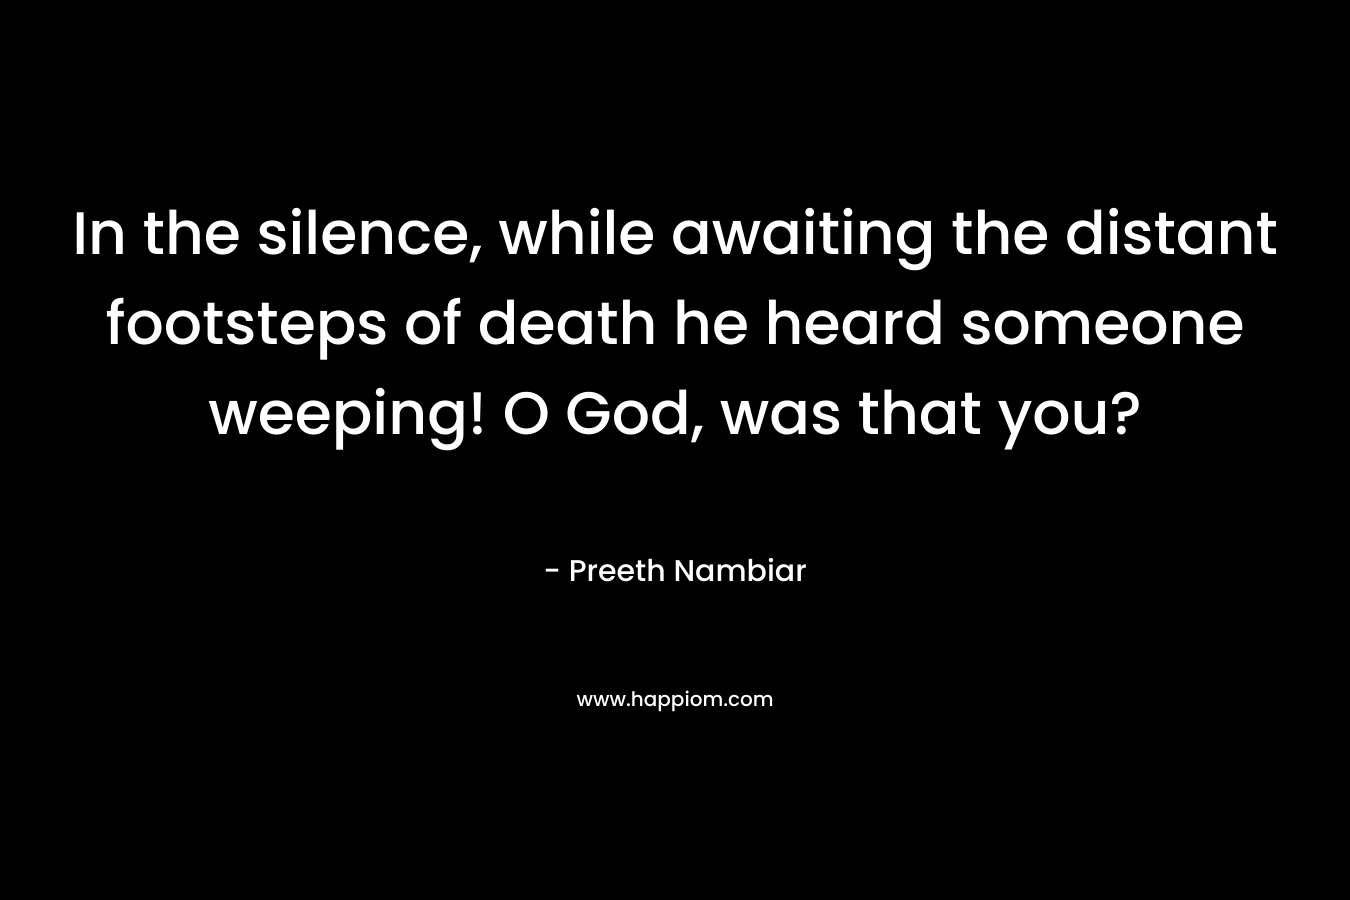 In the silence, while awaiting the distant footsteps of death he heard someone weeping! O God, was that you? – Preeth Nambiar